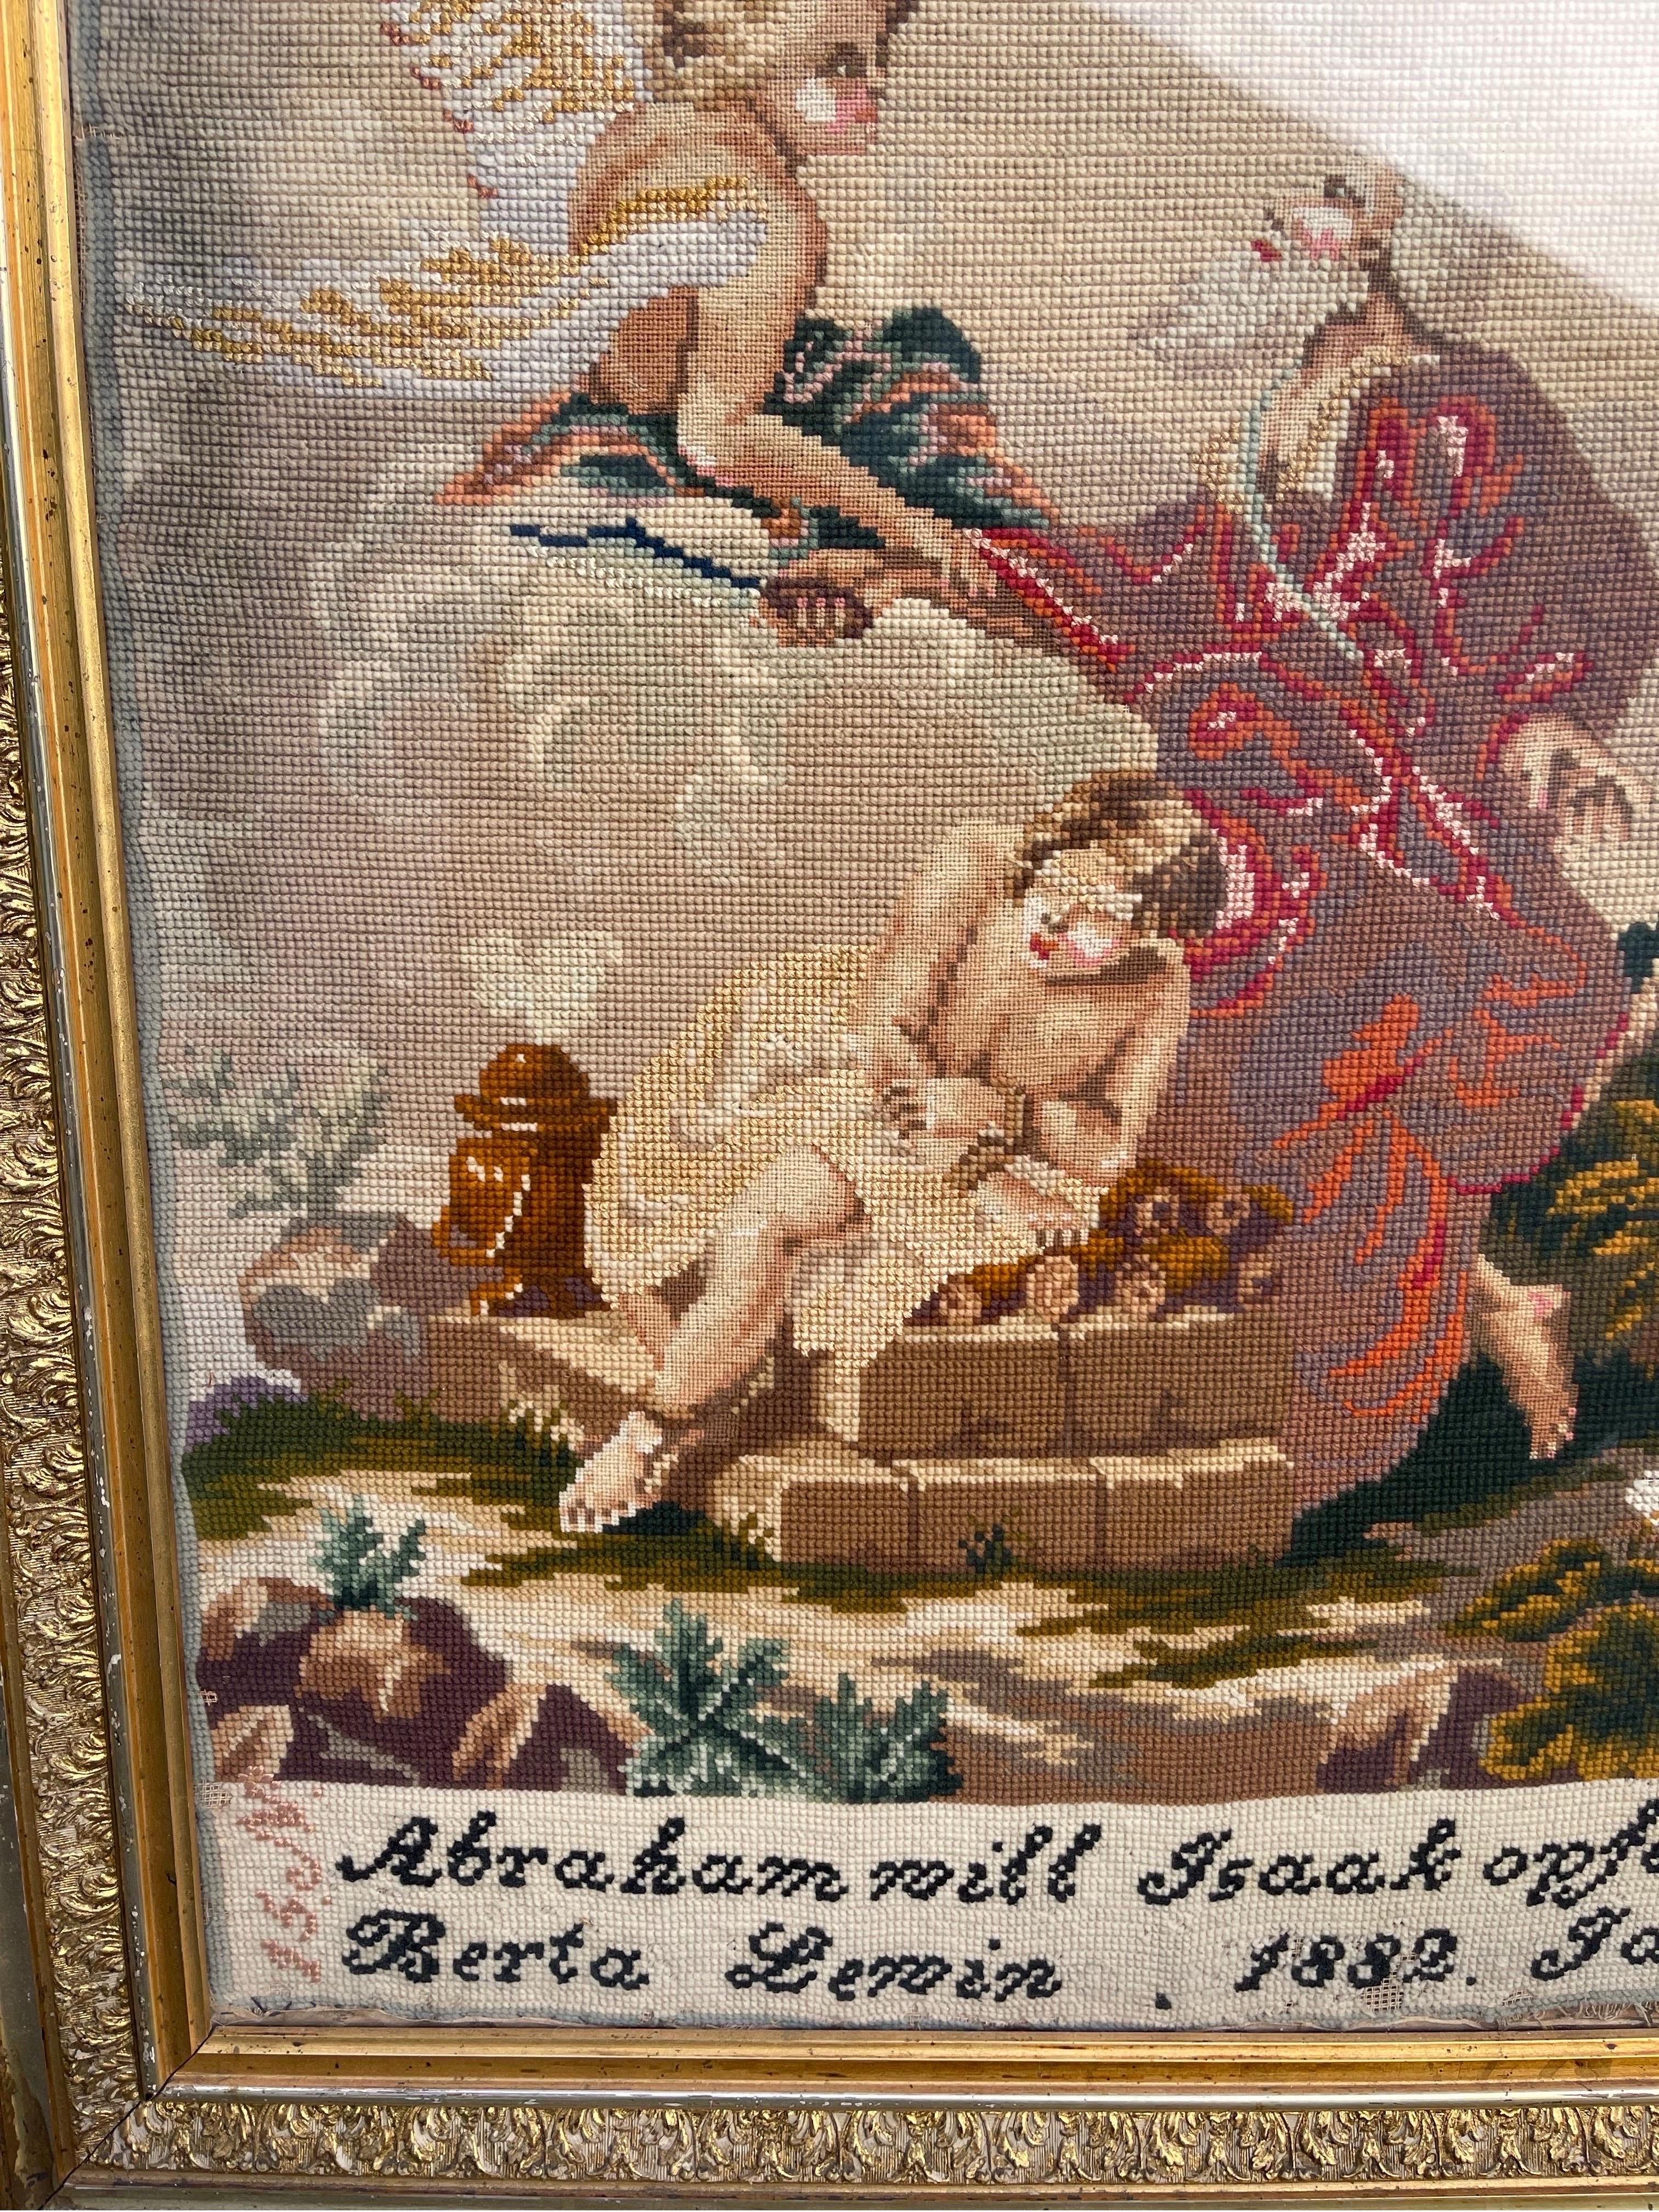 Late 19th Century 19th Century Needlepoint Depiction of “Binding of Isaac” by Abraham, 1882 For Sale